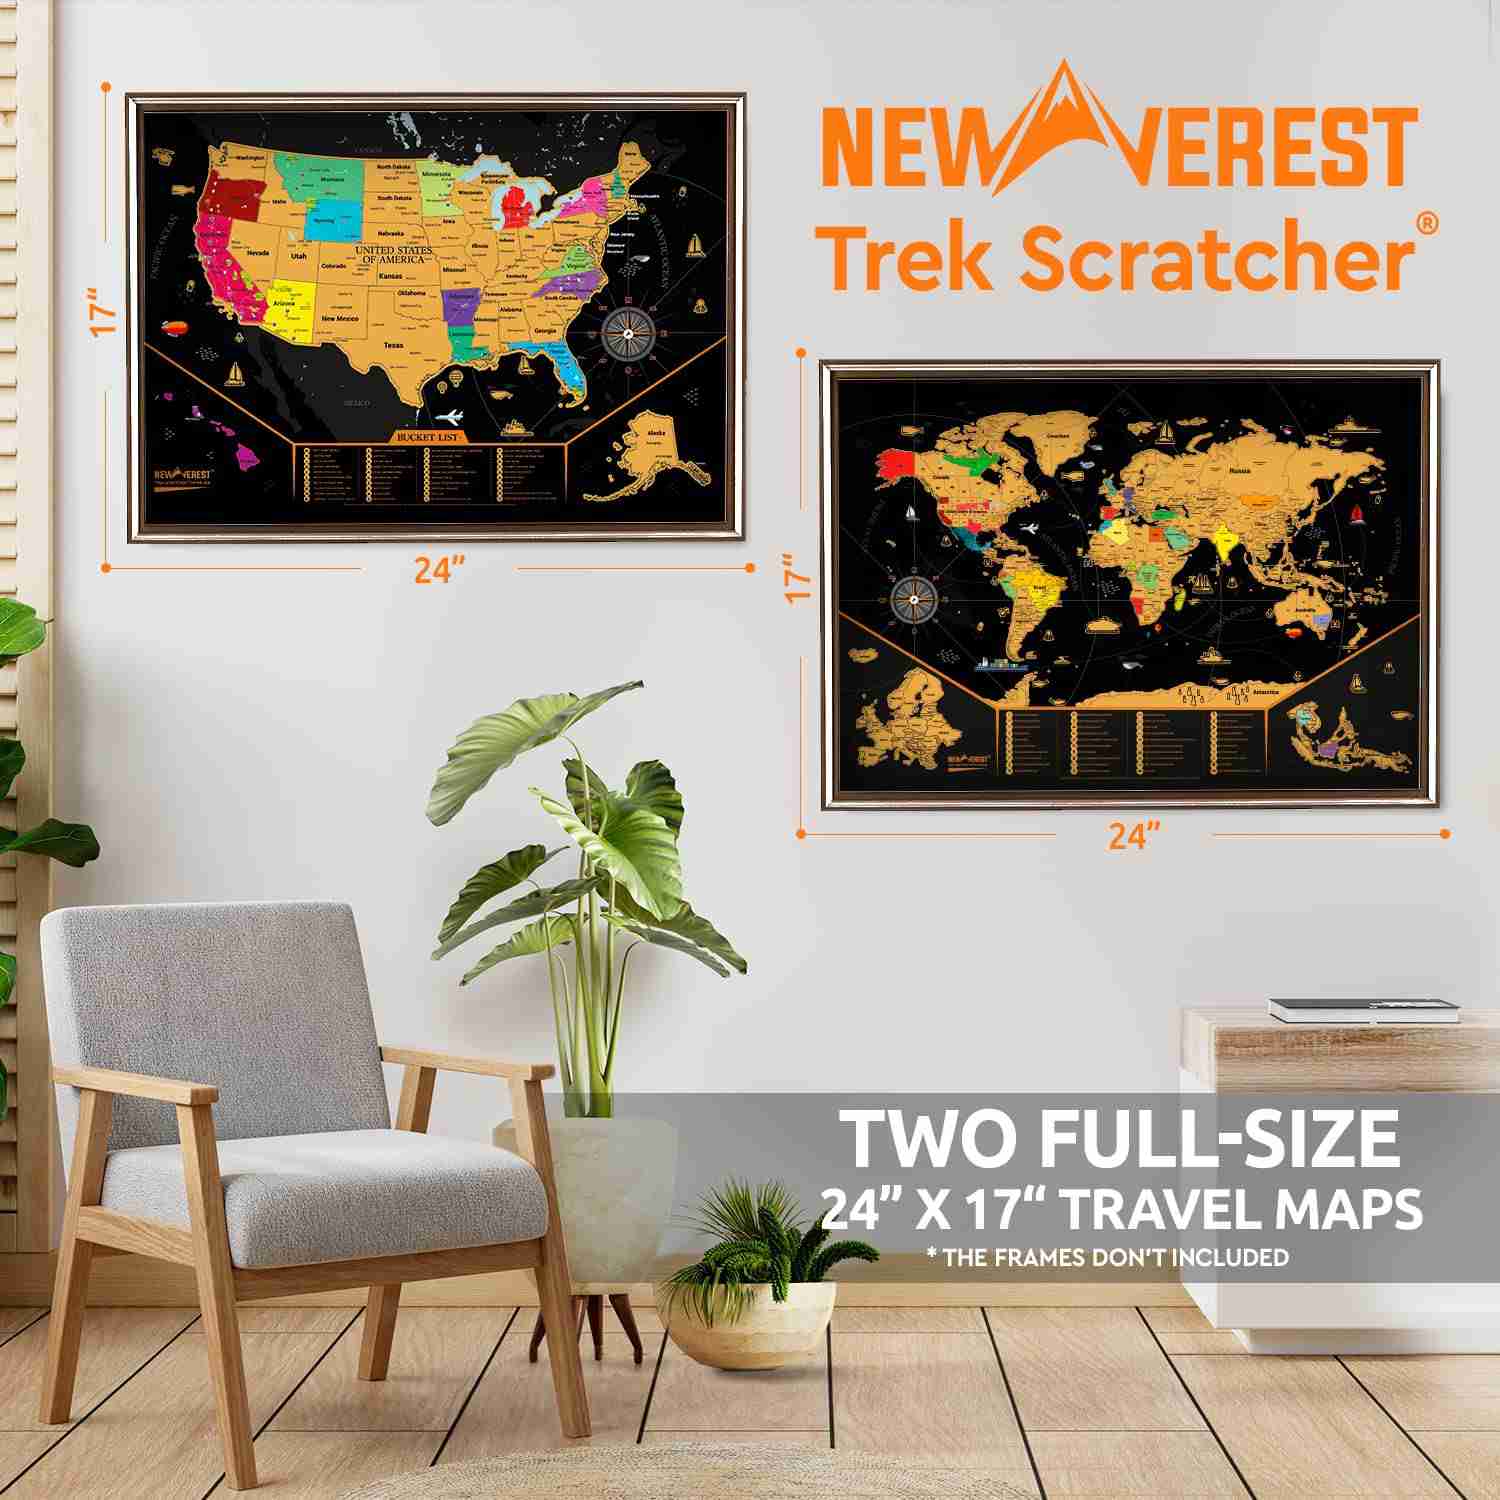 scratch-off-map-of-the-usa-world-travel-poster with discount code